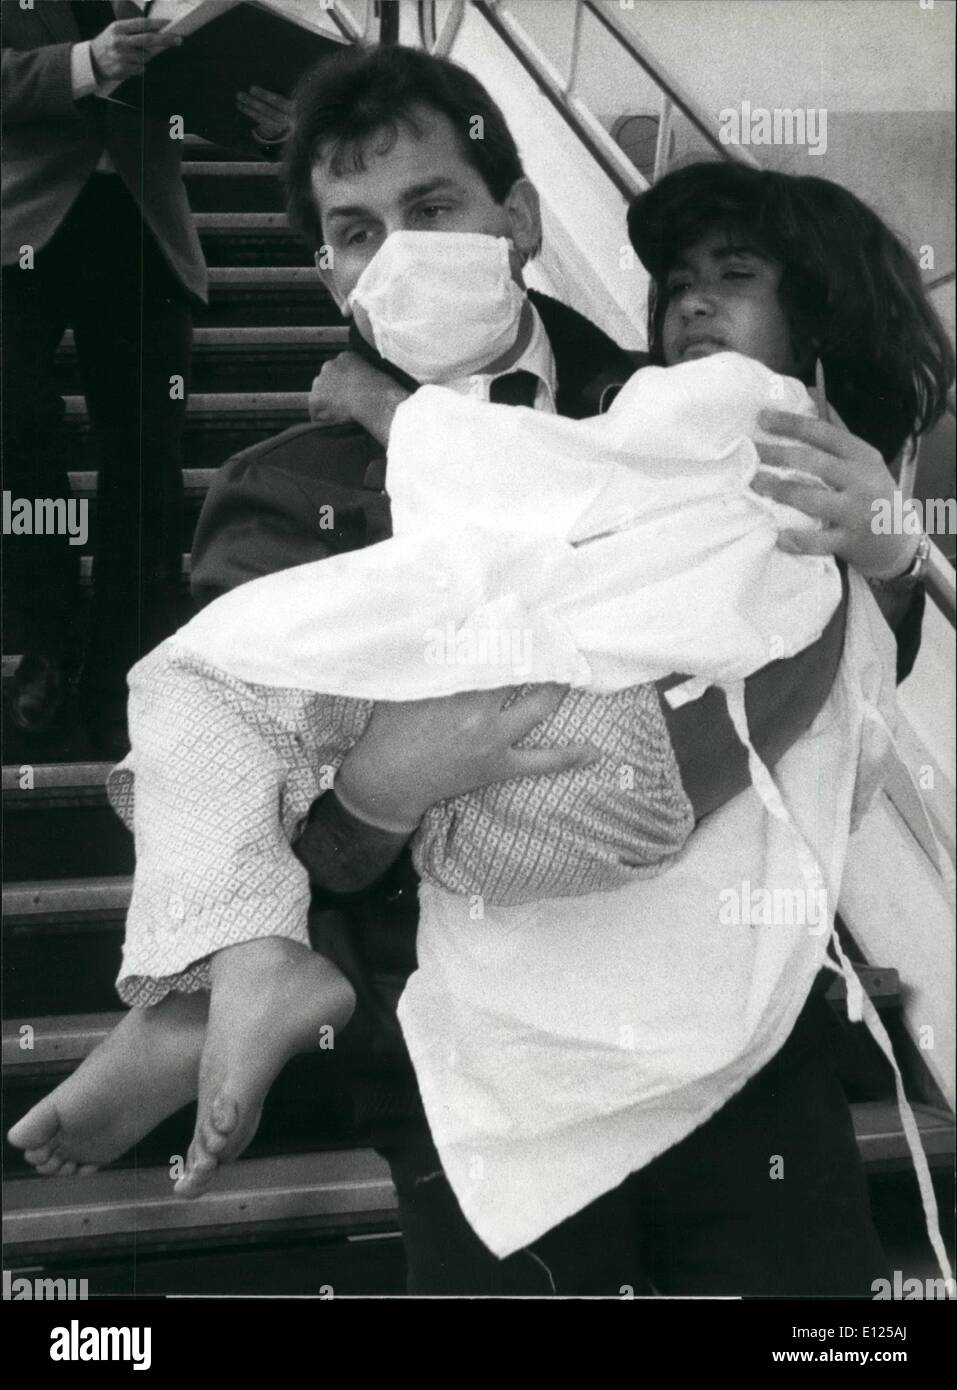 Mar. 03, 1988 - Poison Gas Victims arrive in Switzerland Vitim's of the poison gas attack on Iranian territory last week are carried out of an airplane, march 29, after they arrived on Geneva airport for medical treatment ion Swiss hospitals. Stock Photo